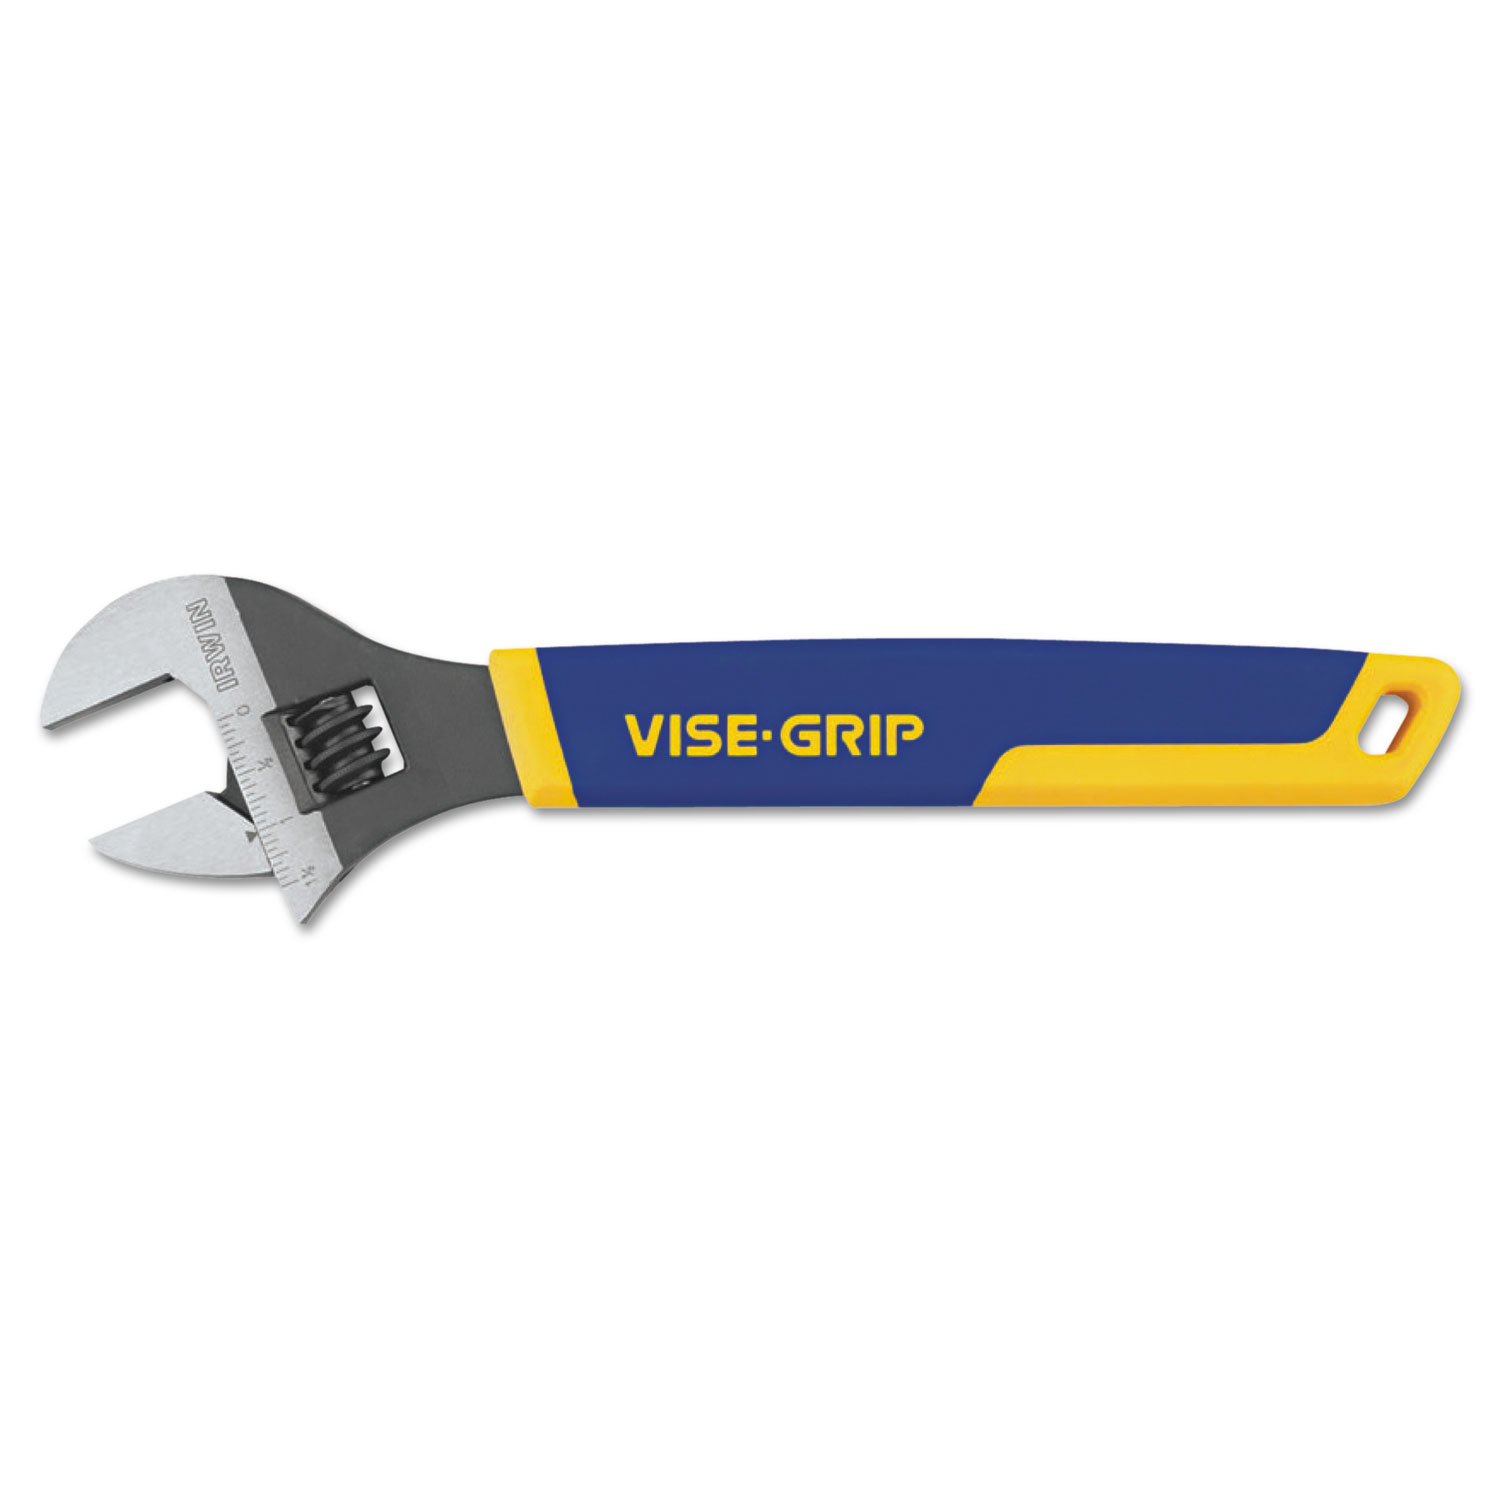 IRWIN VISE-GRIP Adjustable Wrench, 10 Long, 1 1/4 Jaw Capacity